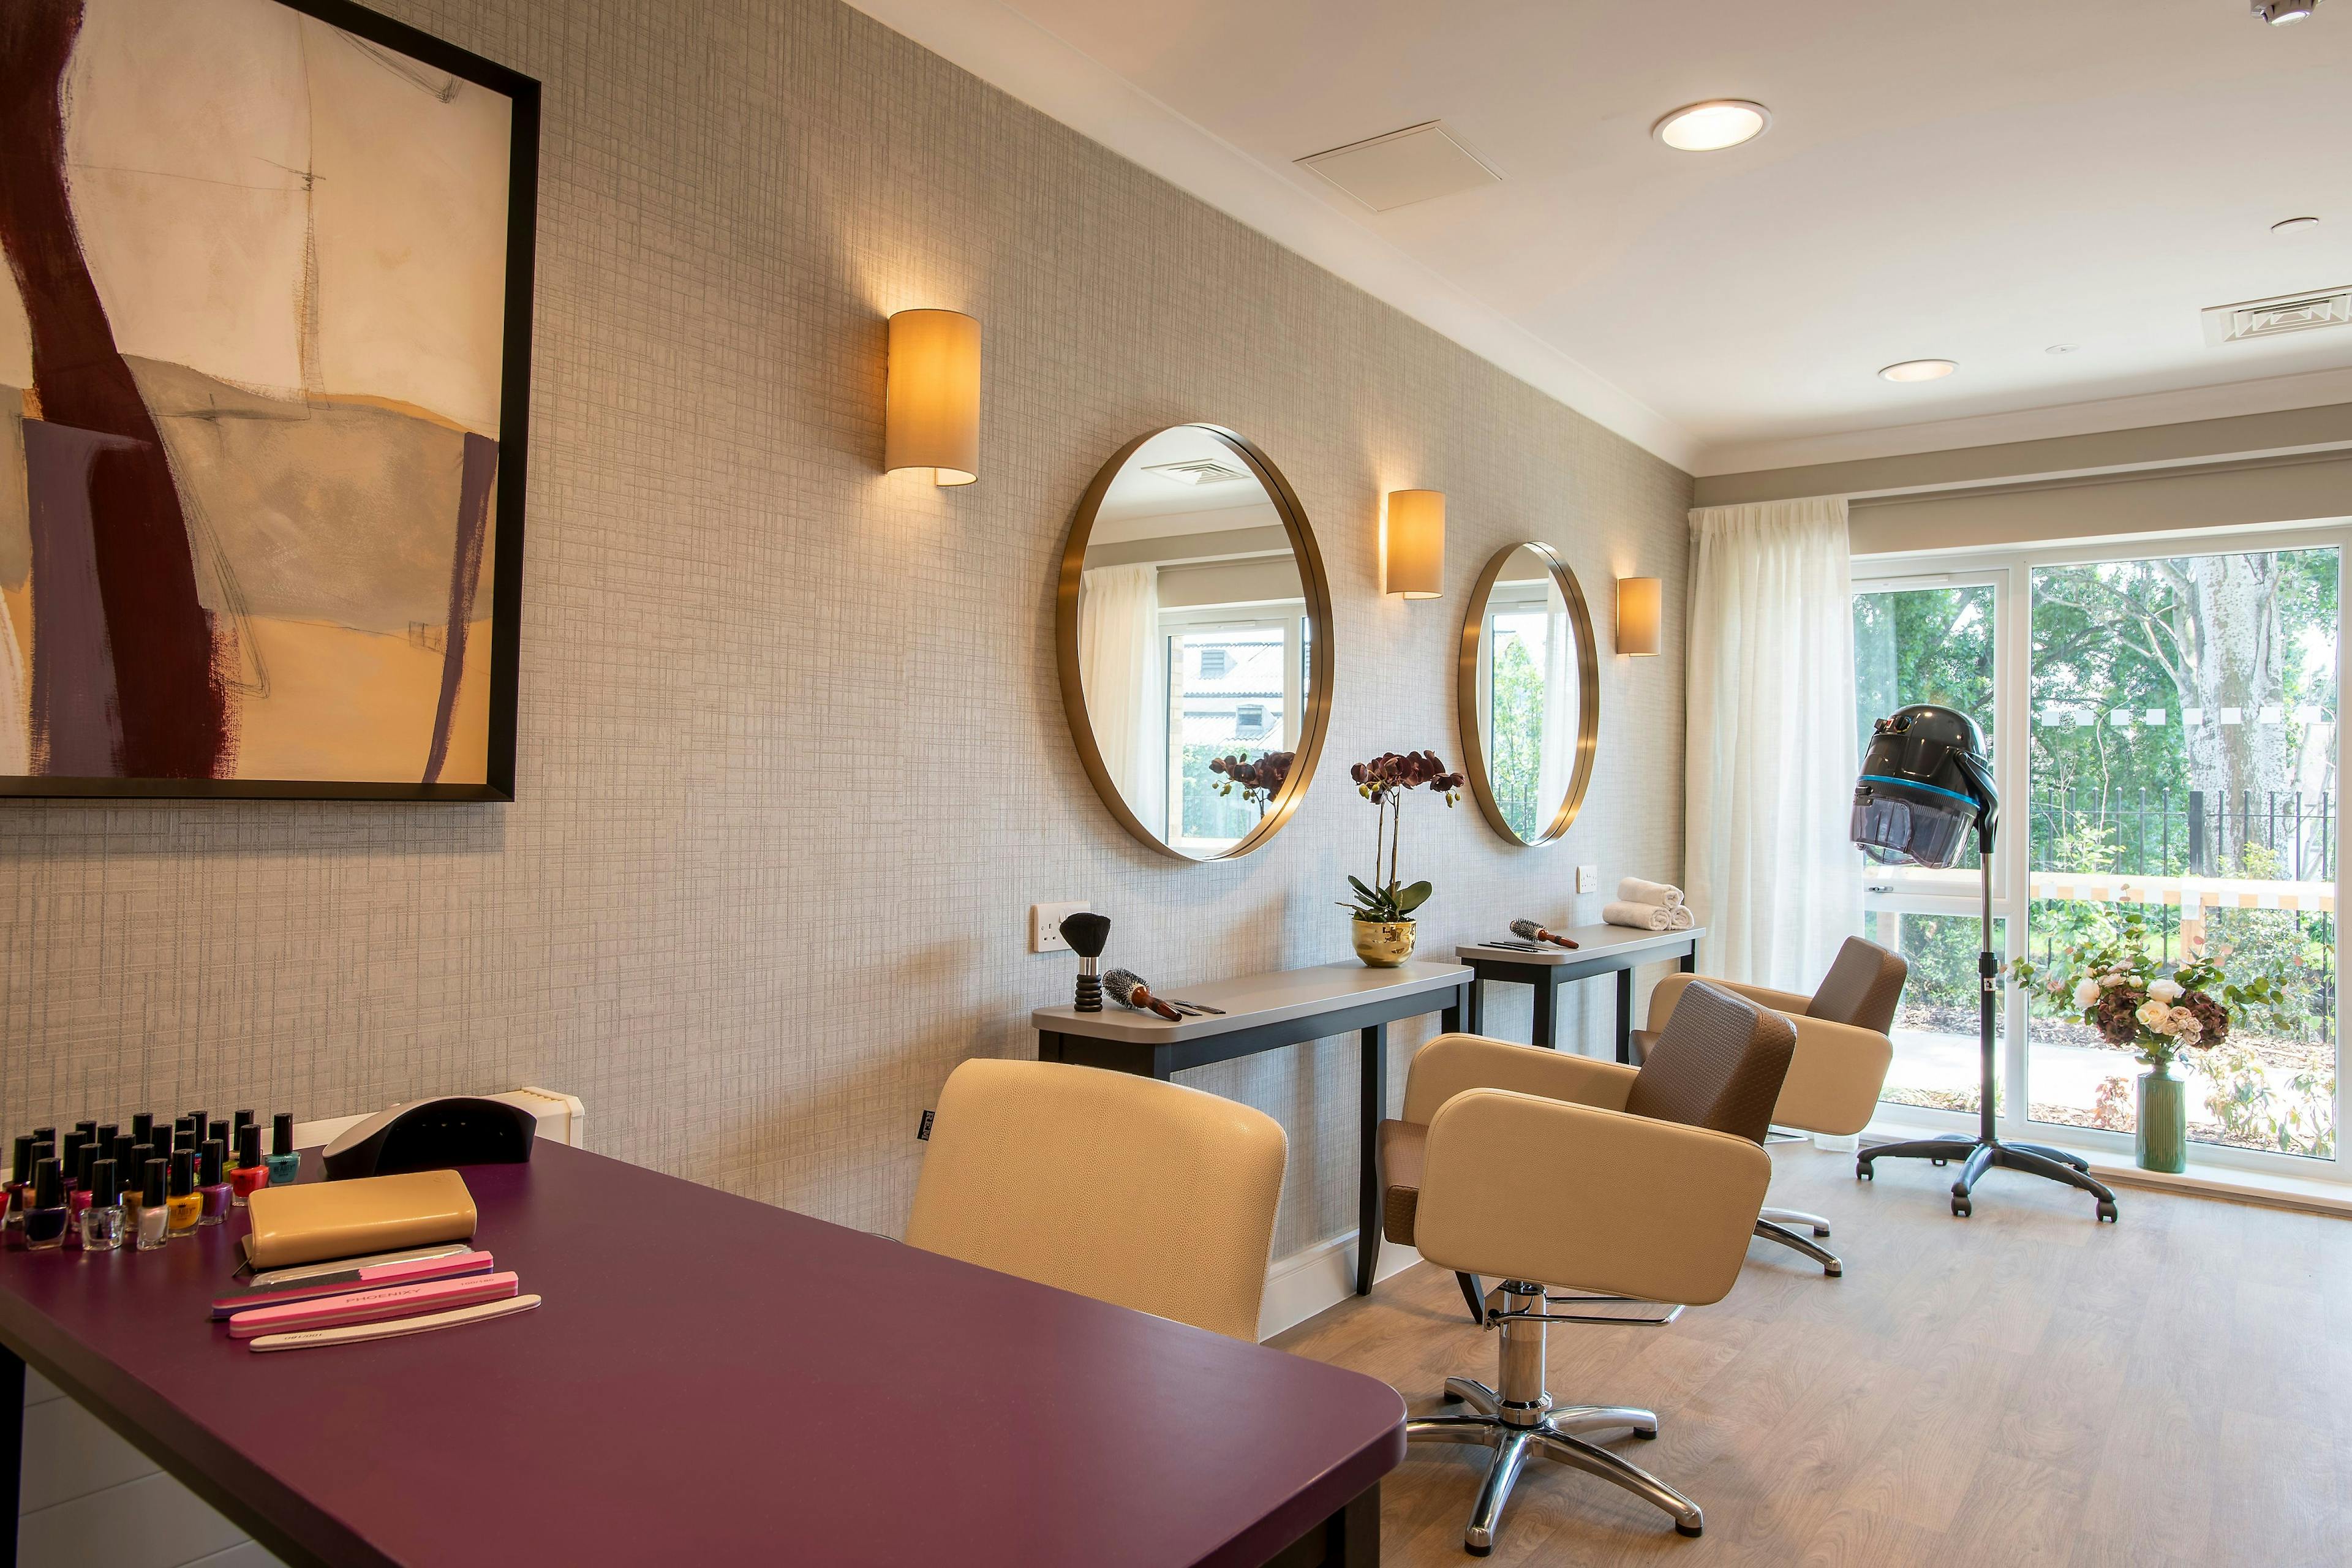 Salon at Brookwater House care home in Enfield, London